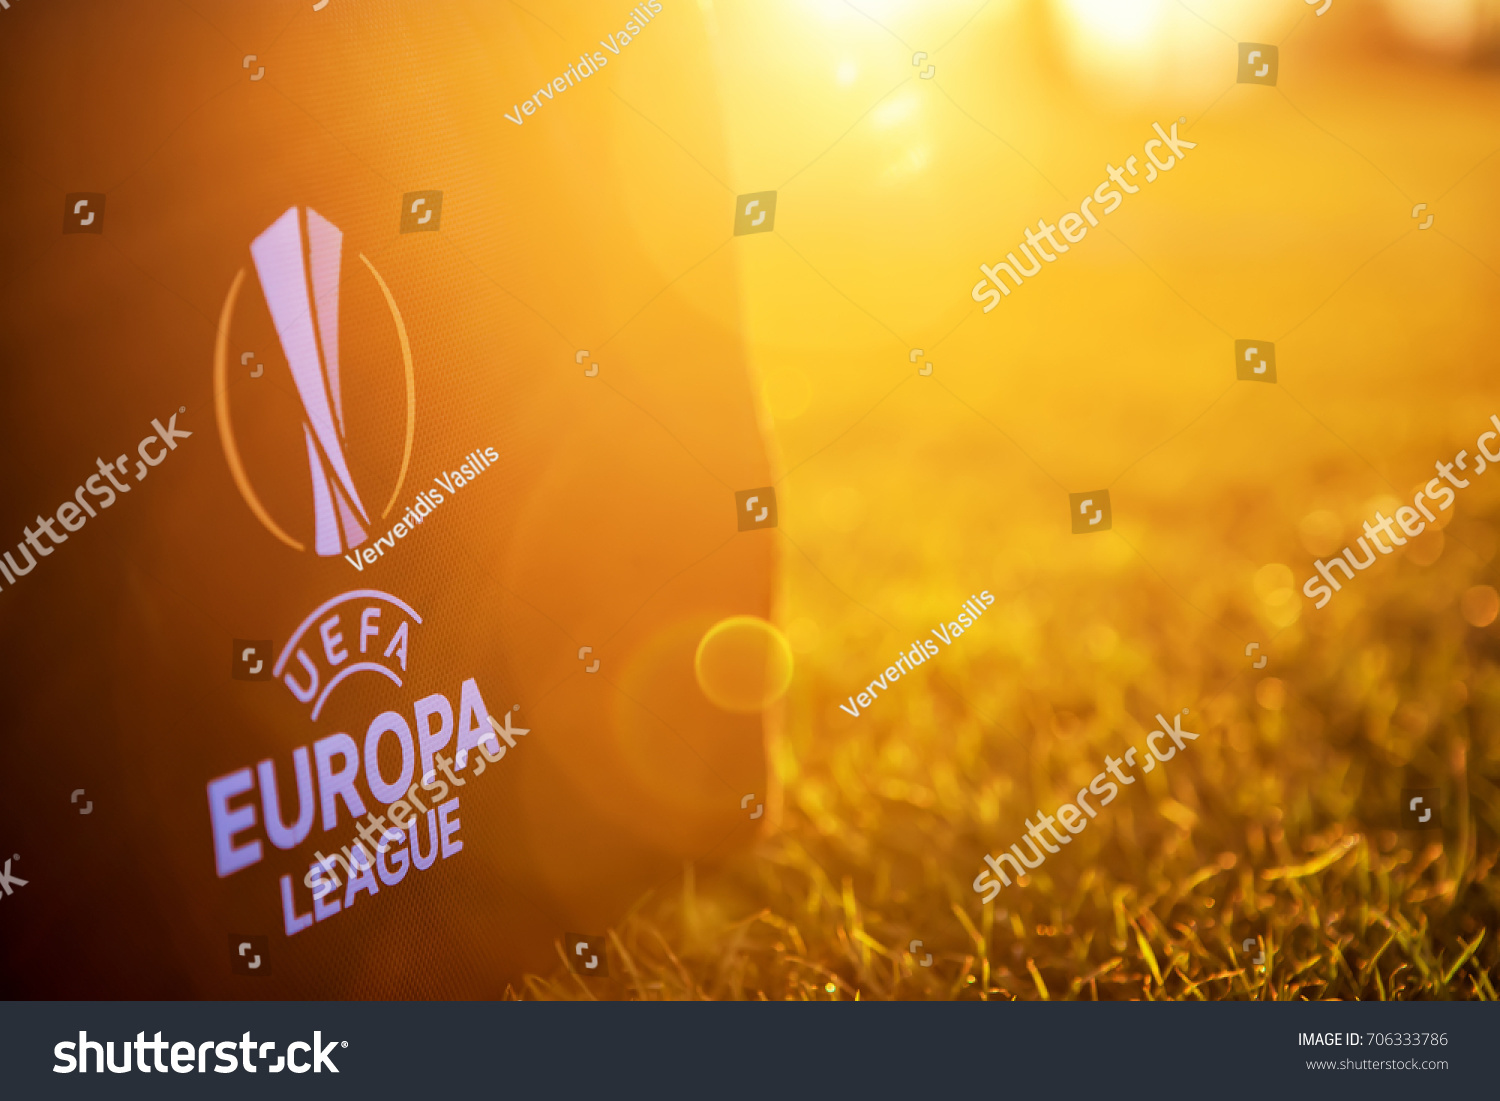 Thessaloniki, Greece- August 2, 2017: UEFA Europa League Logo on the bag on the pitch in the sunset 